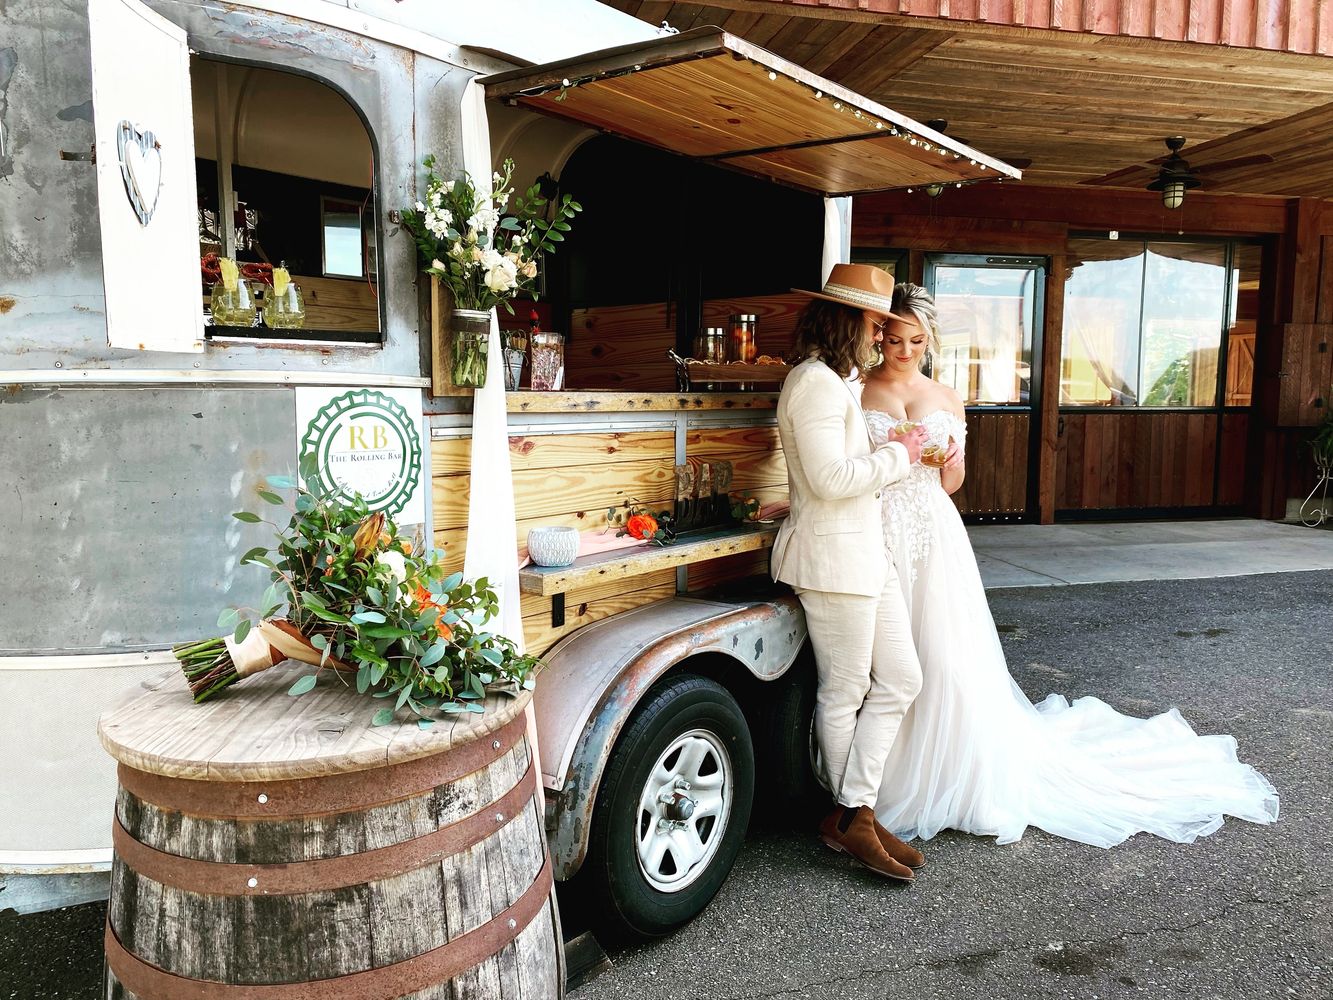 The Rolling Bar Georgia Mobile Horse Trailer Bar offers bartending services to events and weddings 